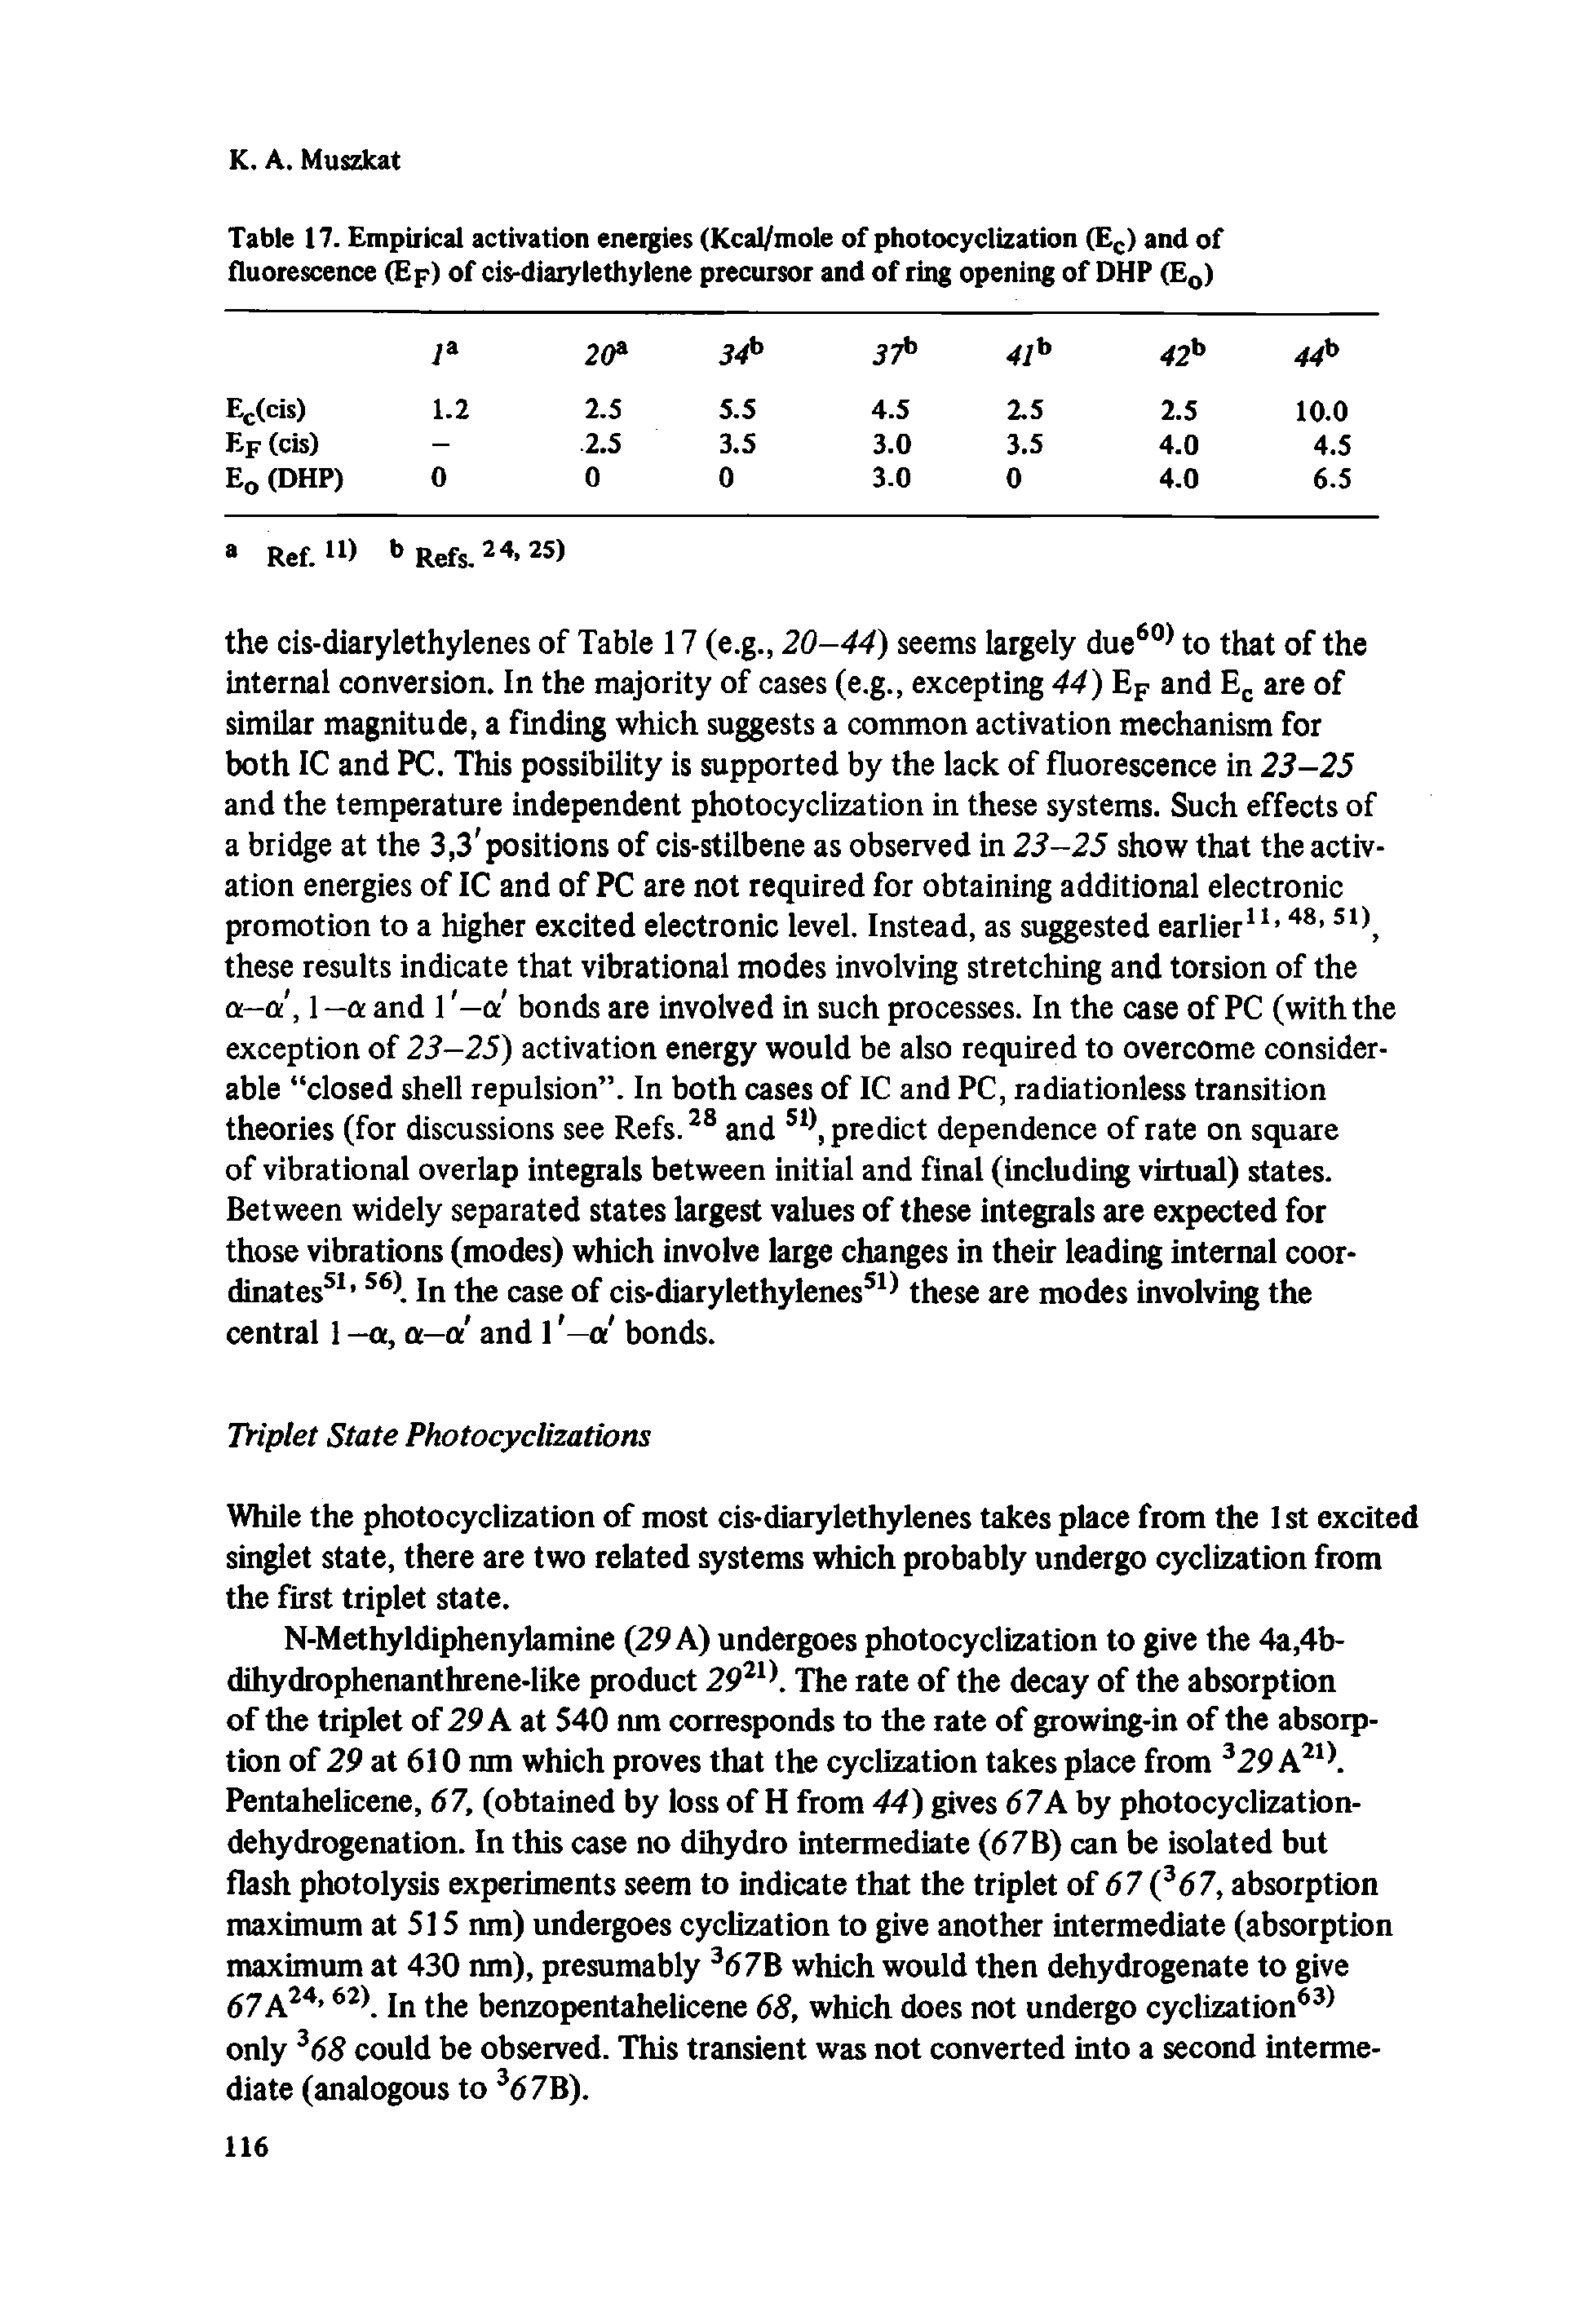 Table 17. Empirical activation energies (Kcal/mole of photocyclization ( ,.) and of fluorescence (Ep) of cis-diarylethylene precursor and of ring opening of DHP (Eq)...